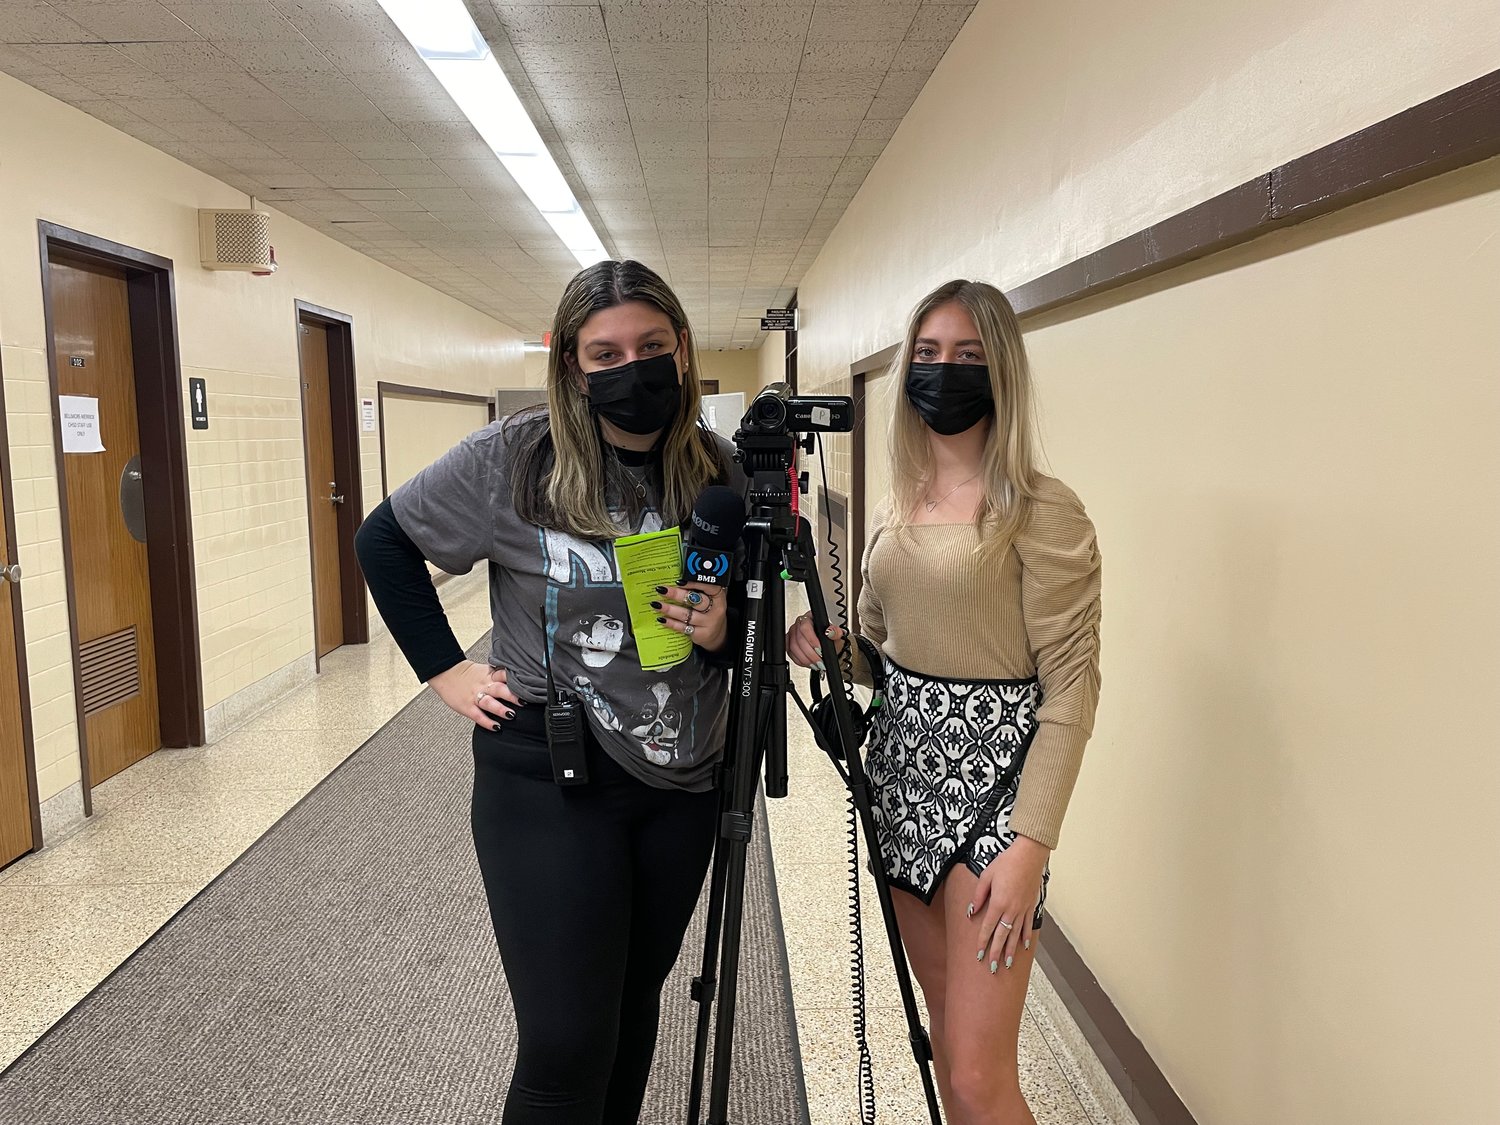 Emily Yucht and Ava Scheffler from the Bellmore-Merrick broadcasting crew at Wellington C. Mepham High School, recorded parts of the event and interviewed students.